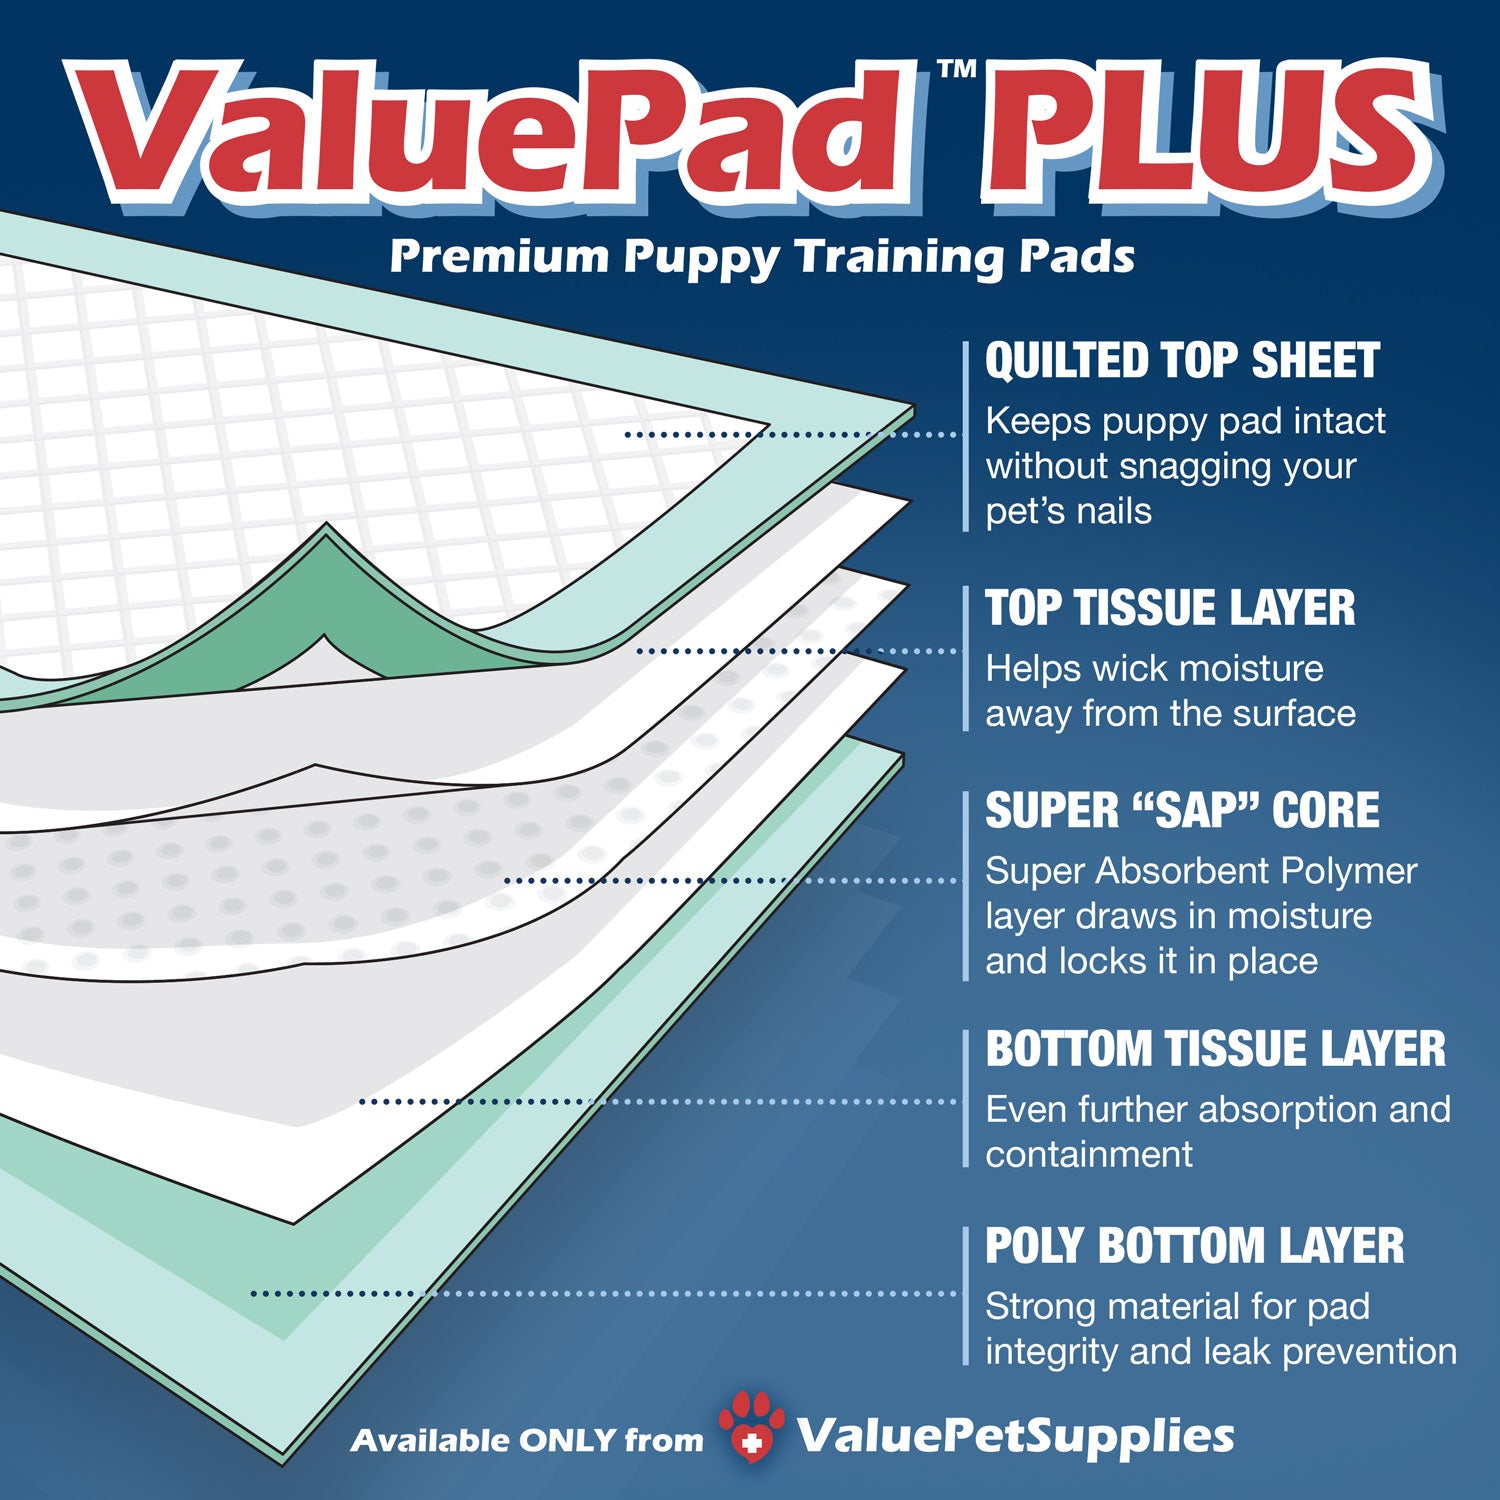 ValuePad Plus Puppy Pads, Small 17x24 Inch, 100 Count